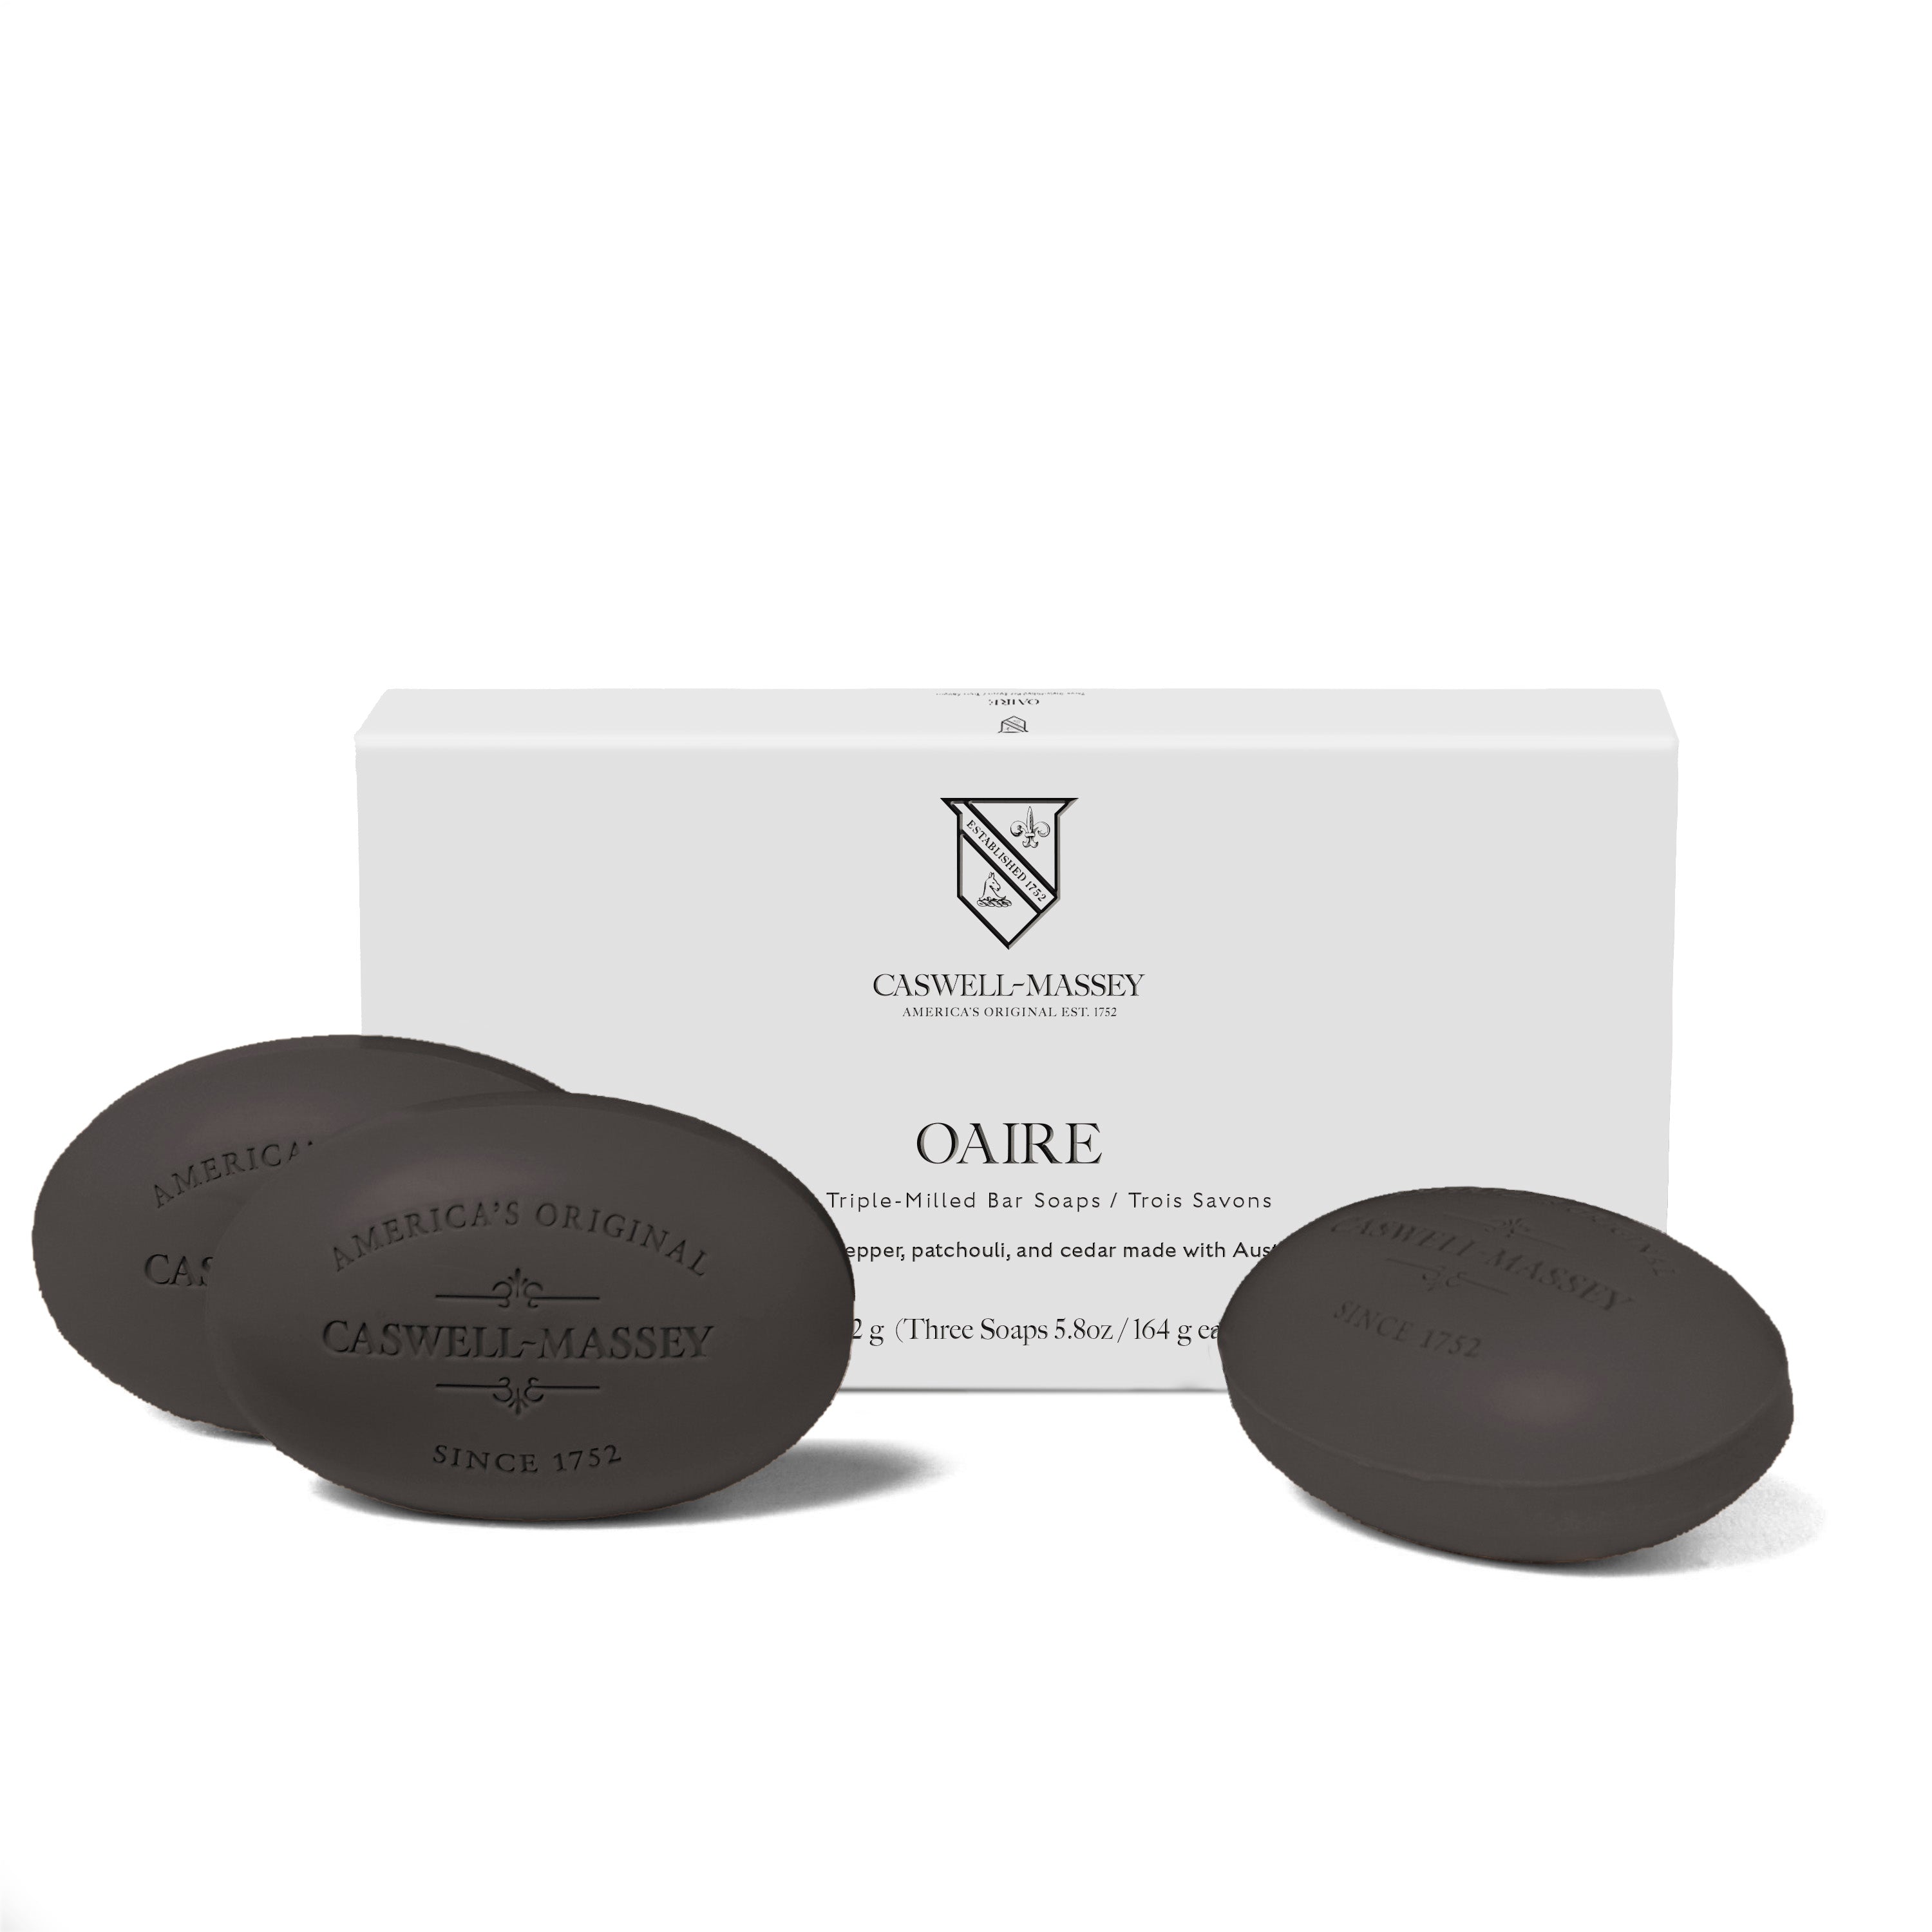 Caswell-Massey Oaire Luxury Bar Soap 3-Soap Set, black bars of soap with gift box